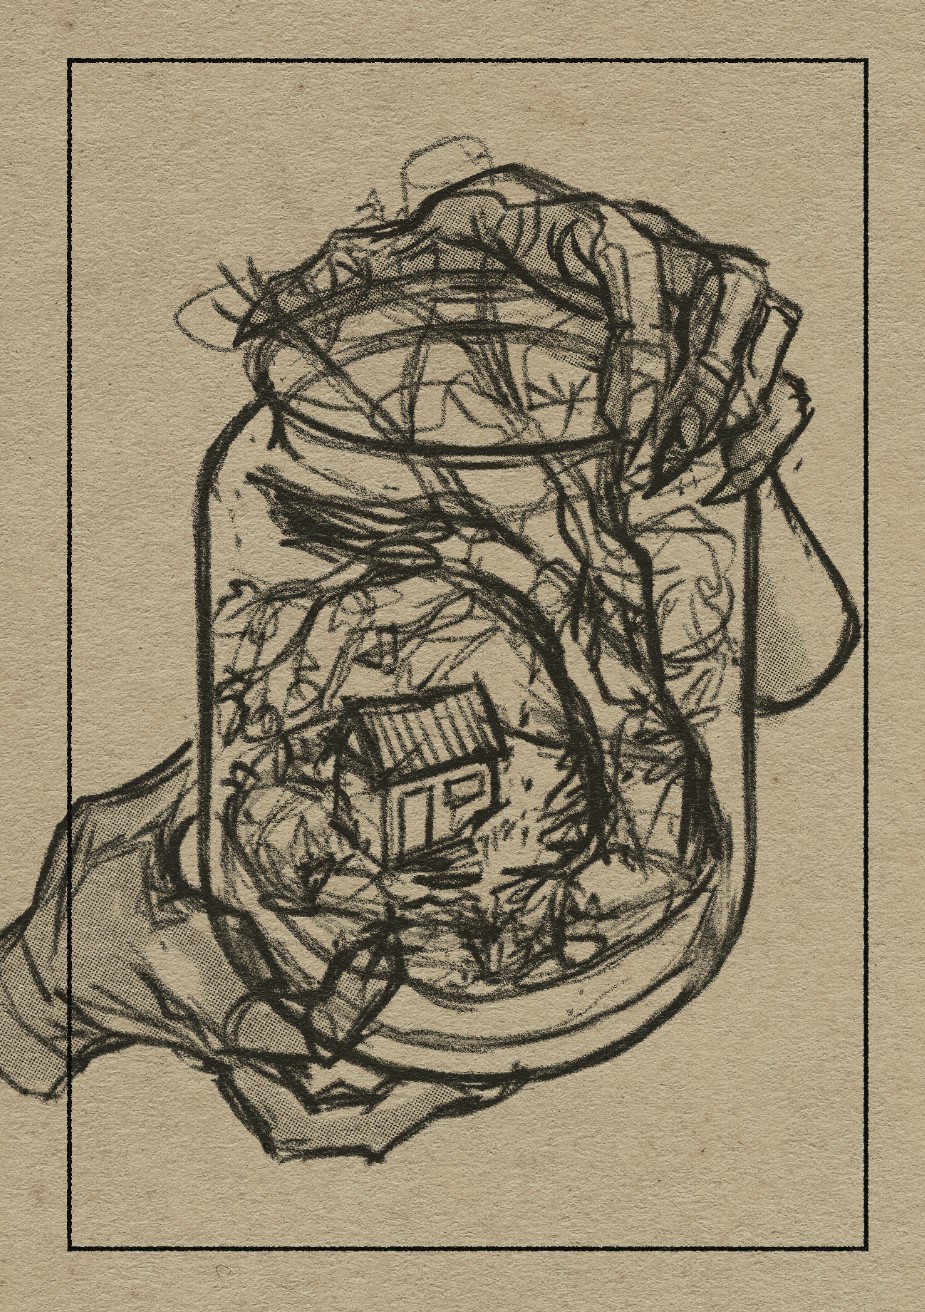 A sketch of a jar held by the hands of a creature. Within the jar is a lush forest and a small house.